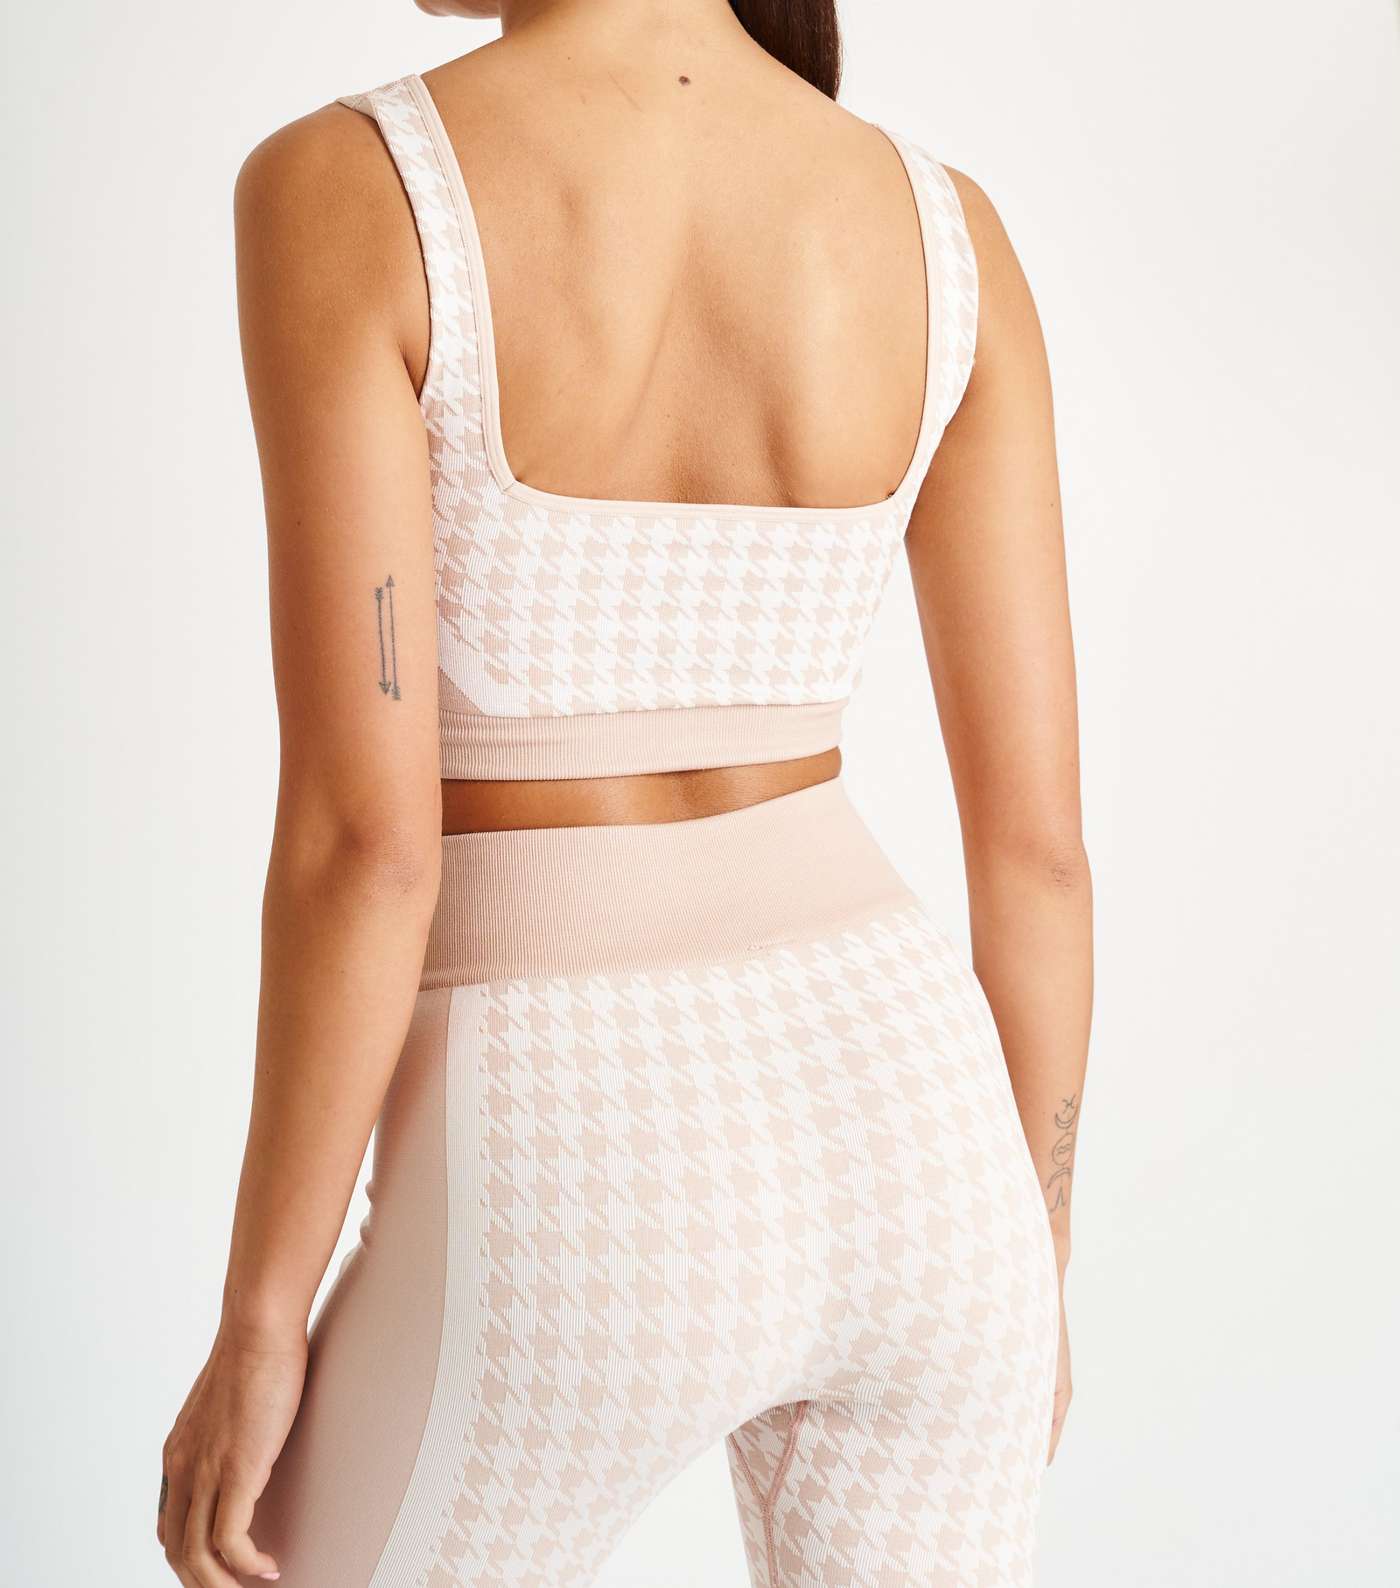 South Beach Stone Dogtooth Seamless Sports Crop Top Image 2